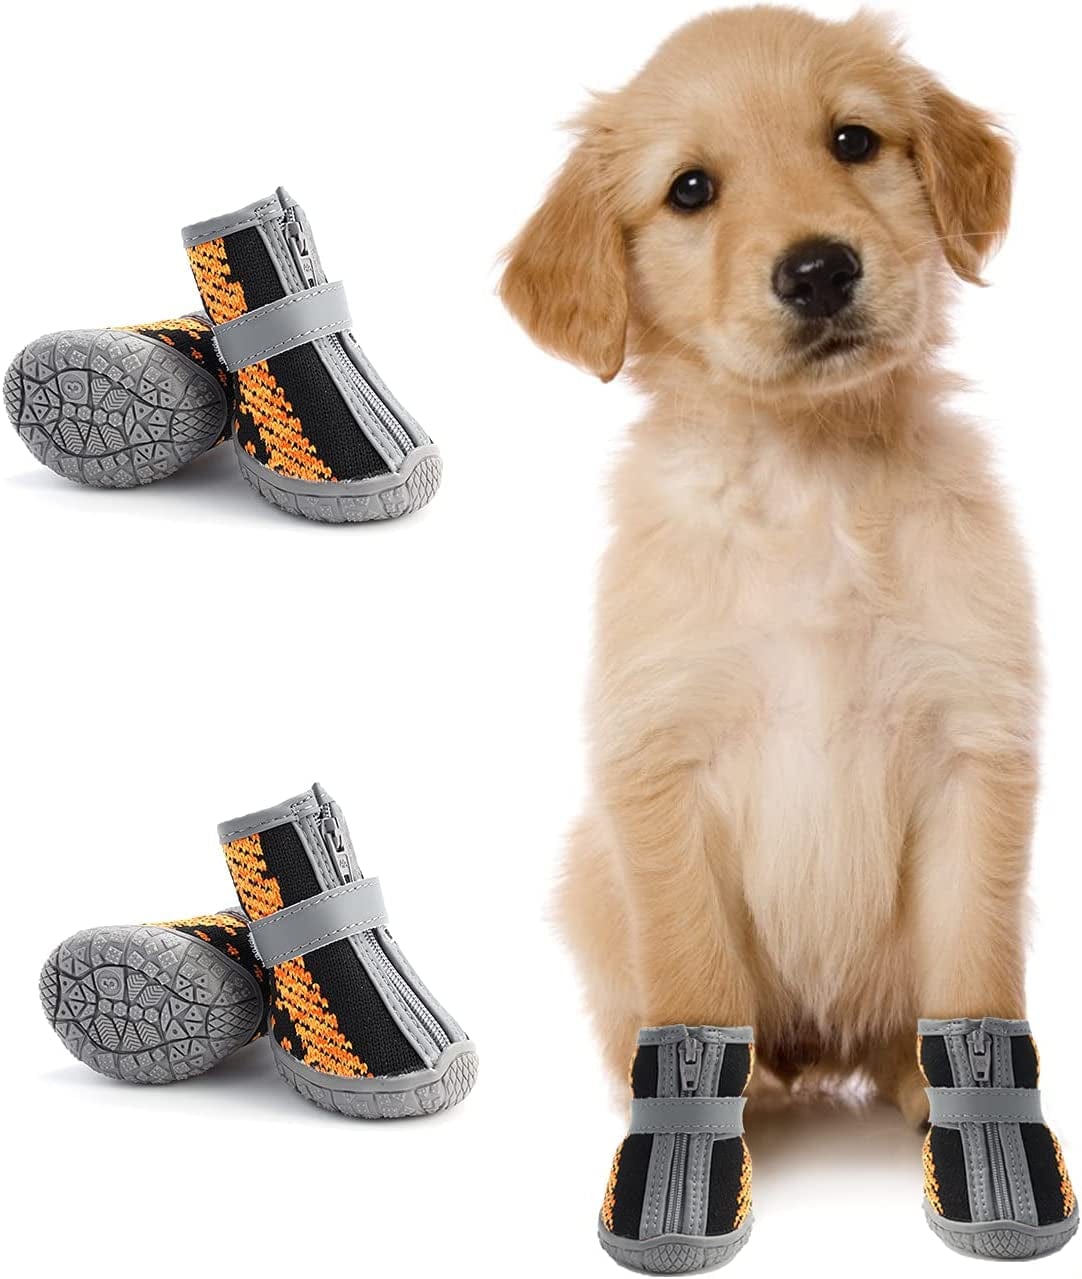 https://kol.pet/cdn/shop/products/dog-shoes-for-hot-pavement-hardwood-floors-breathable-dog-boots-with-anti-slip-rugged-sole-summer-dog-booties-dog-hiking-boots-with-reflective-adjustable-strap-zipper-closure-for-smal_2d23f951-6c5c-4e71-a294-4364c49352b0_1445x.jpg?v=1675877572